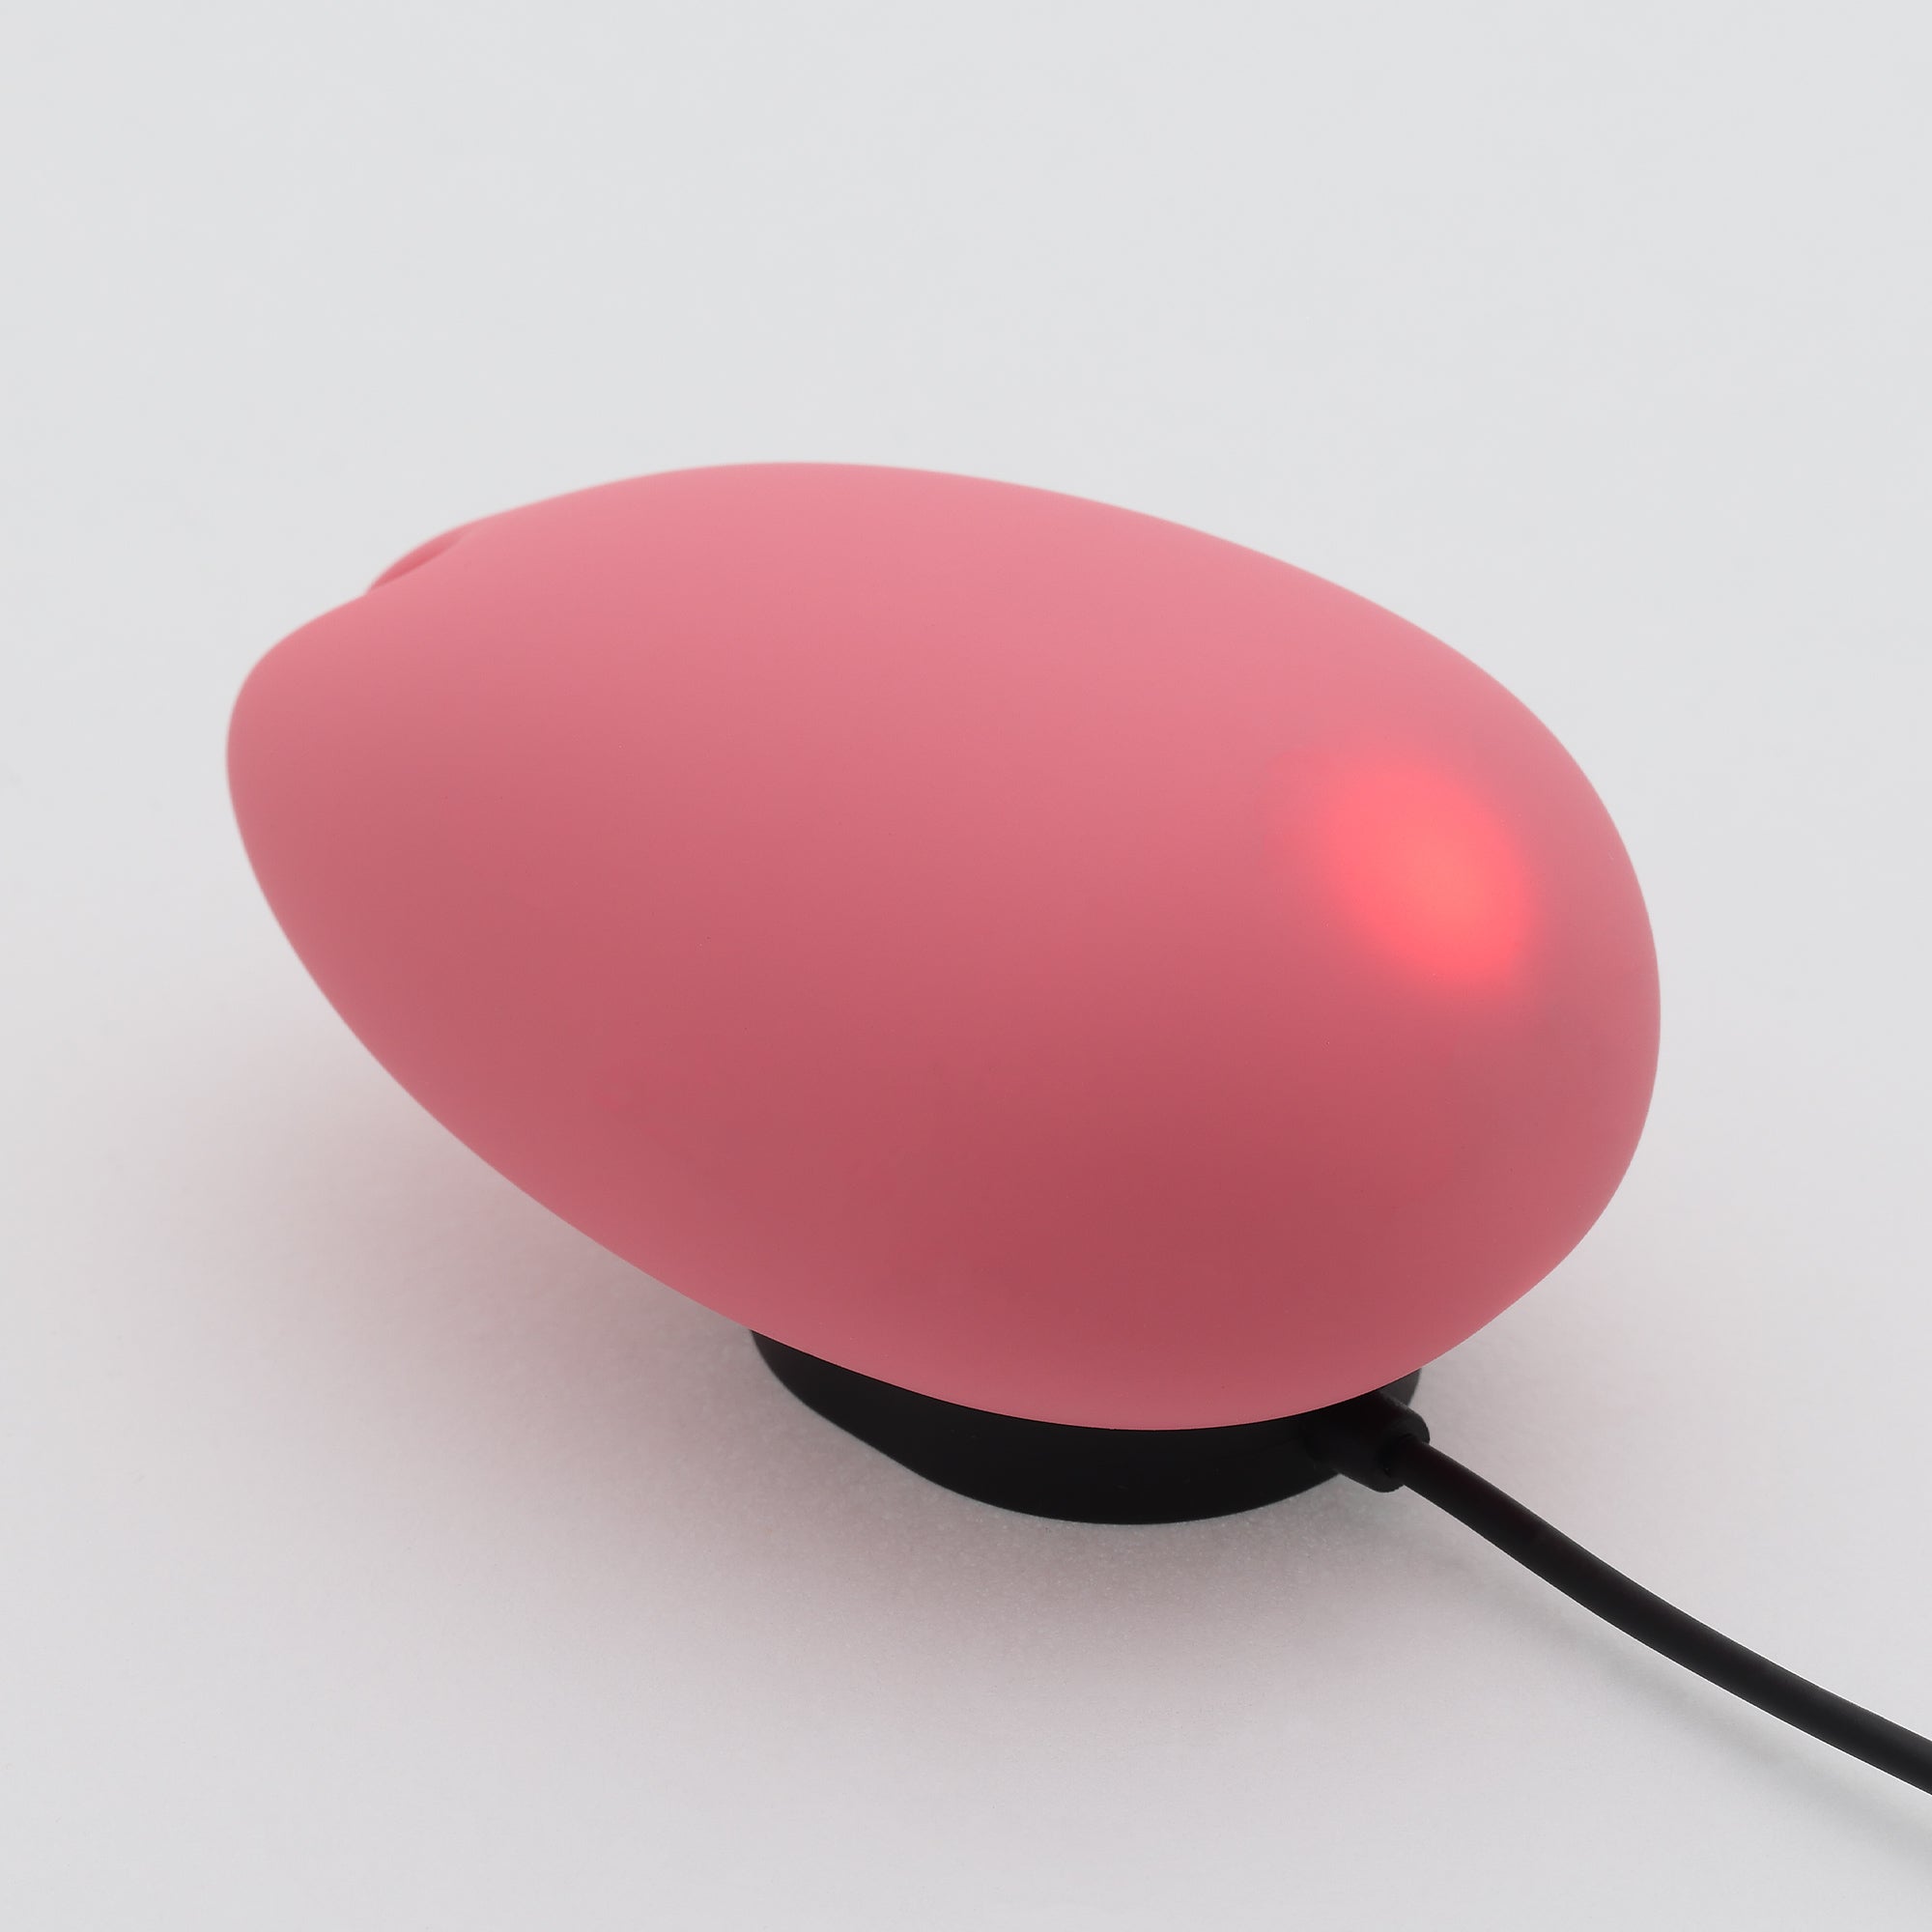 Sakura Nadeshiko Pink, a sophisticated female personal pleasure device designed for ergonomic comfort and intimate enjoyment. With a soft pink hue and graceful curves, this product is available from the UK TENGA STORE and reflects an artful blend of form and function